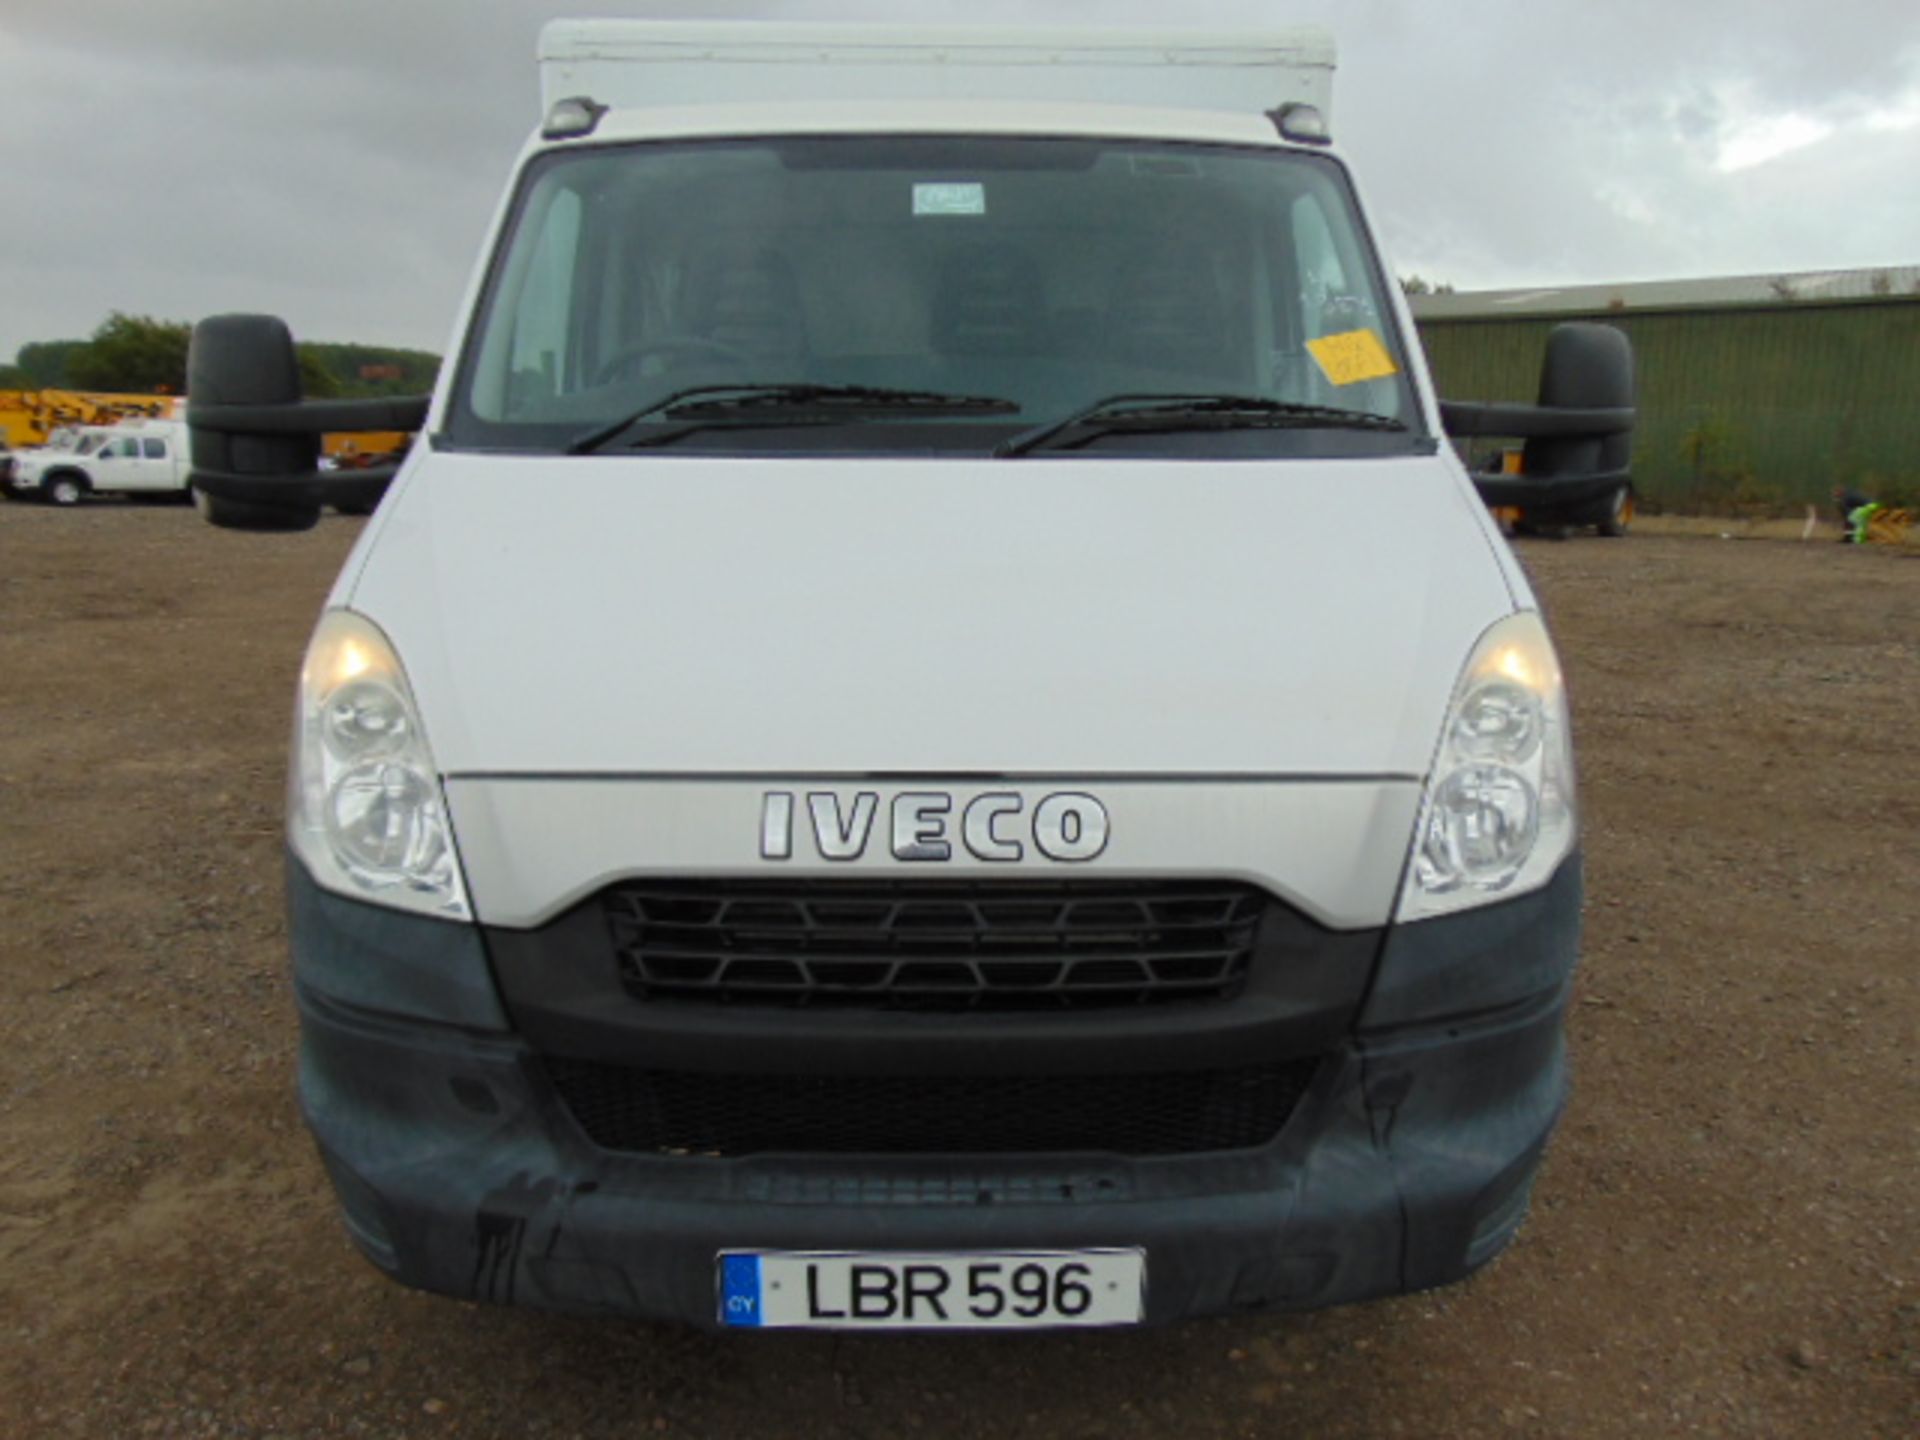 2013 Ford Iveco Daily 40C15 Chassis Cab with Fitted Box Body - Image 2 of 24